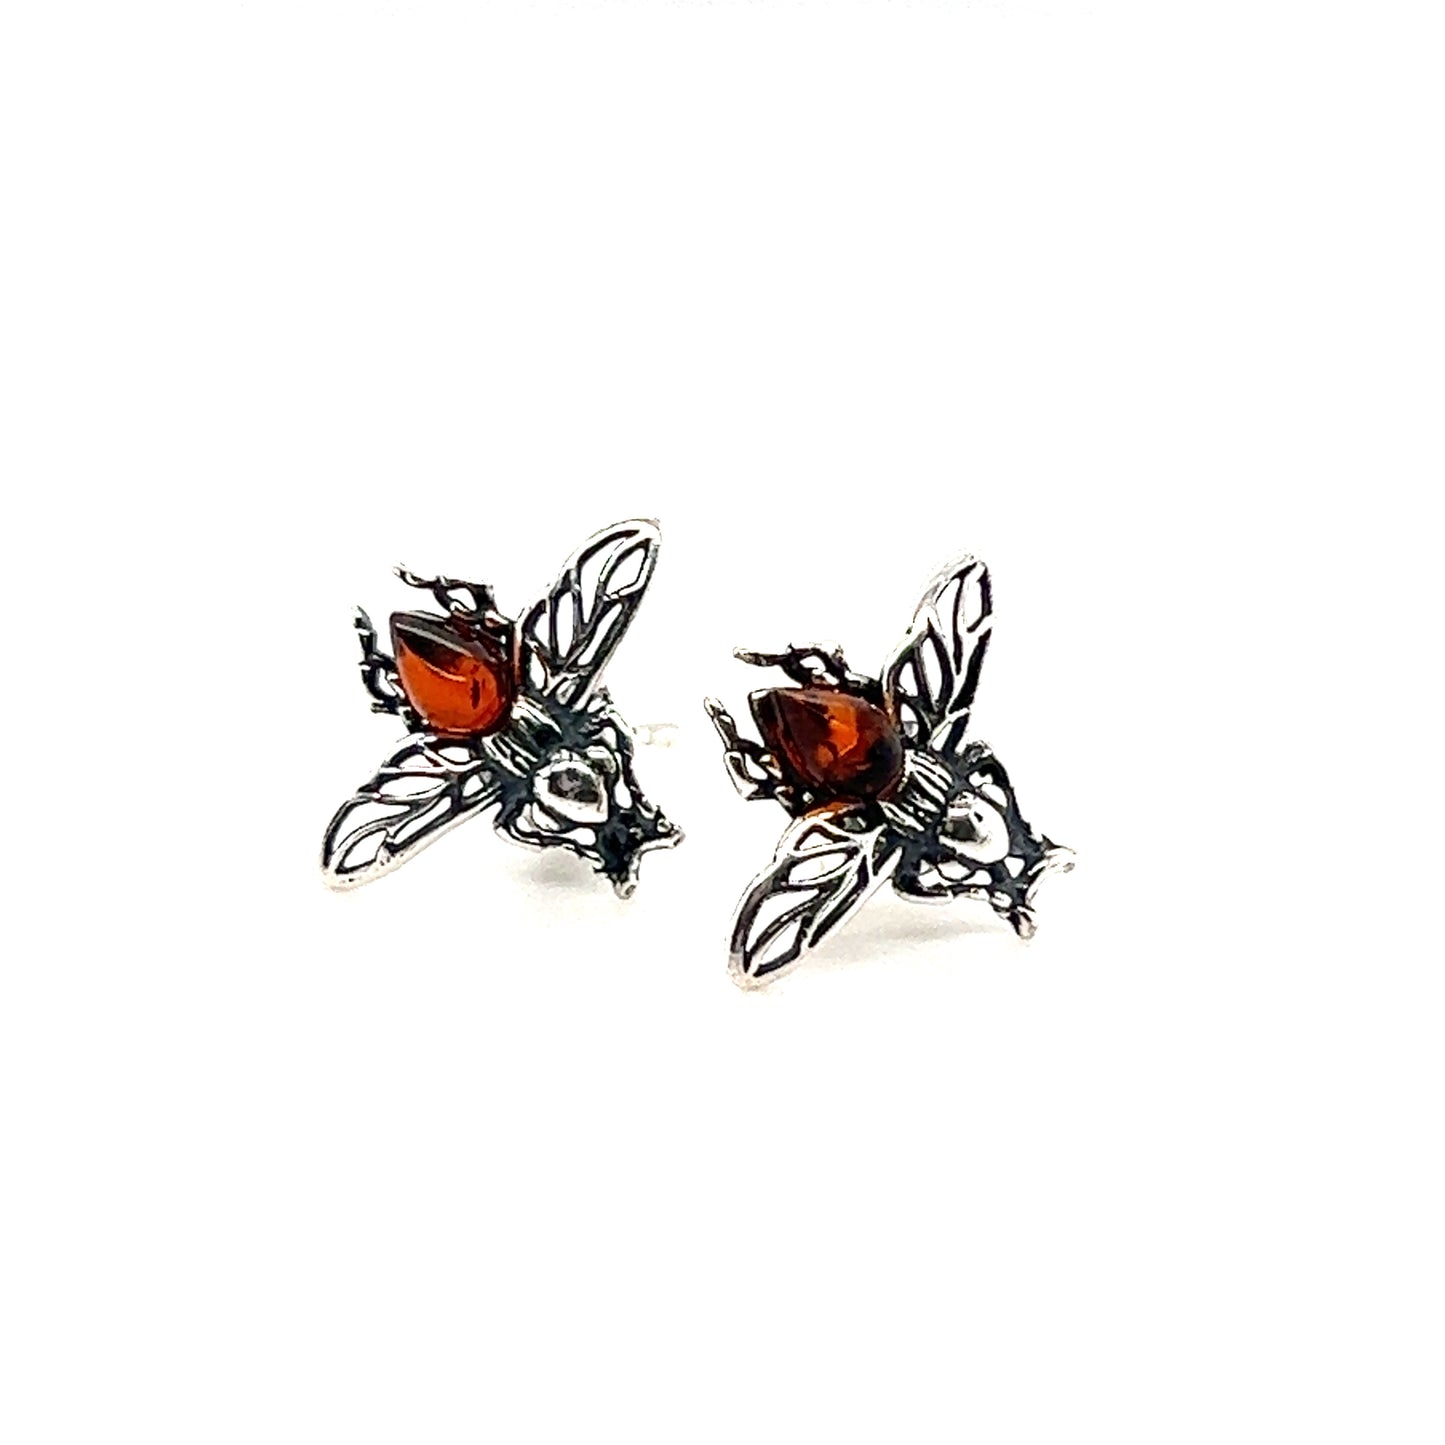 A pair of Detailed Baltic Amber Bee Studs made by Super Silver on a white background.